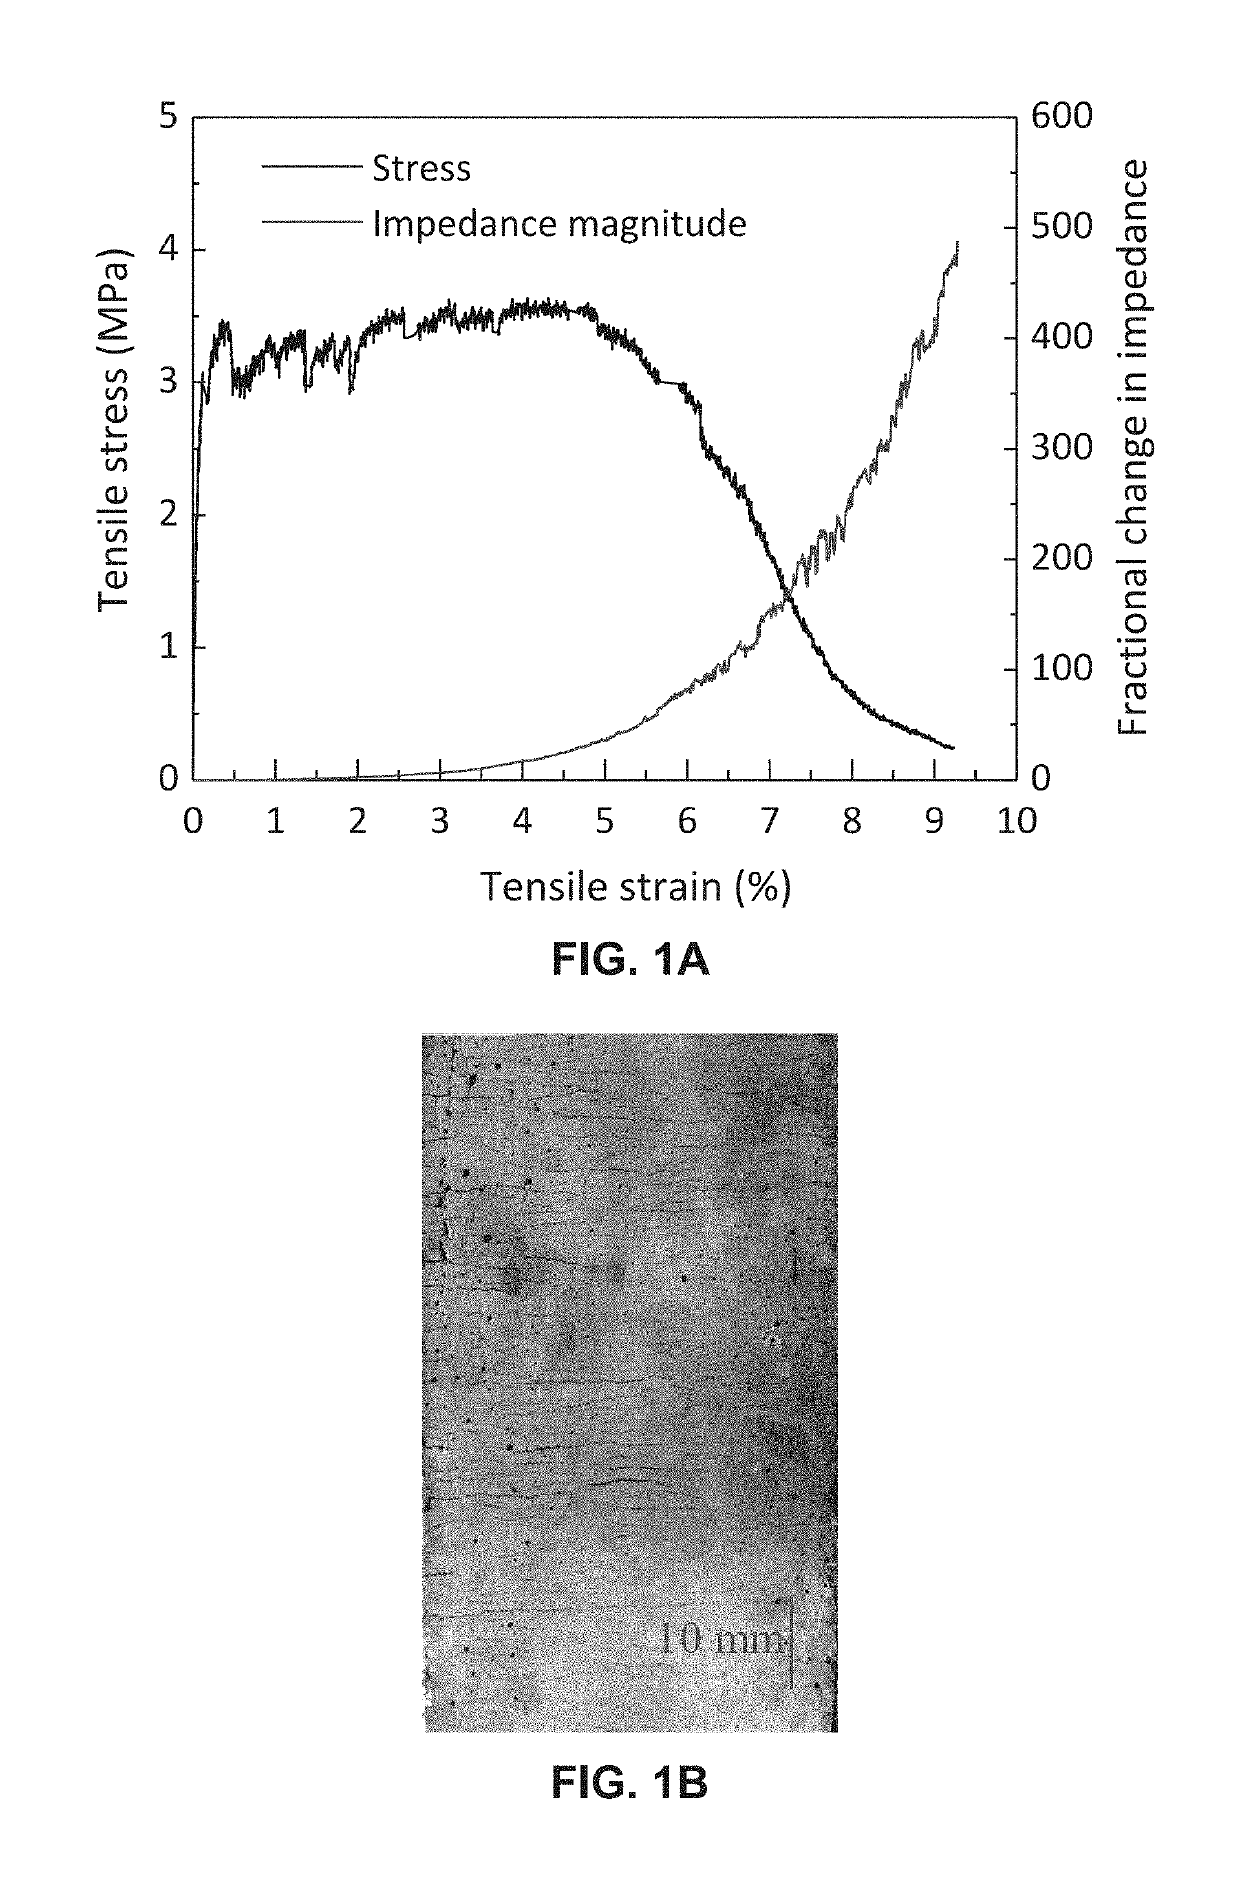 Multi-functional cementitious materials with ultra-high damage tolerance and self-sensing ability